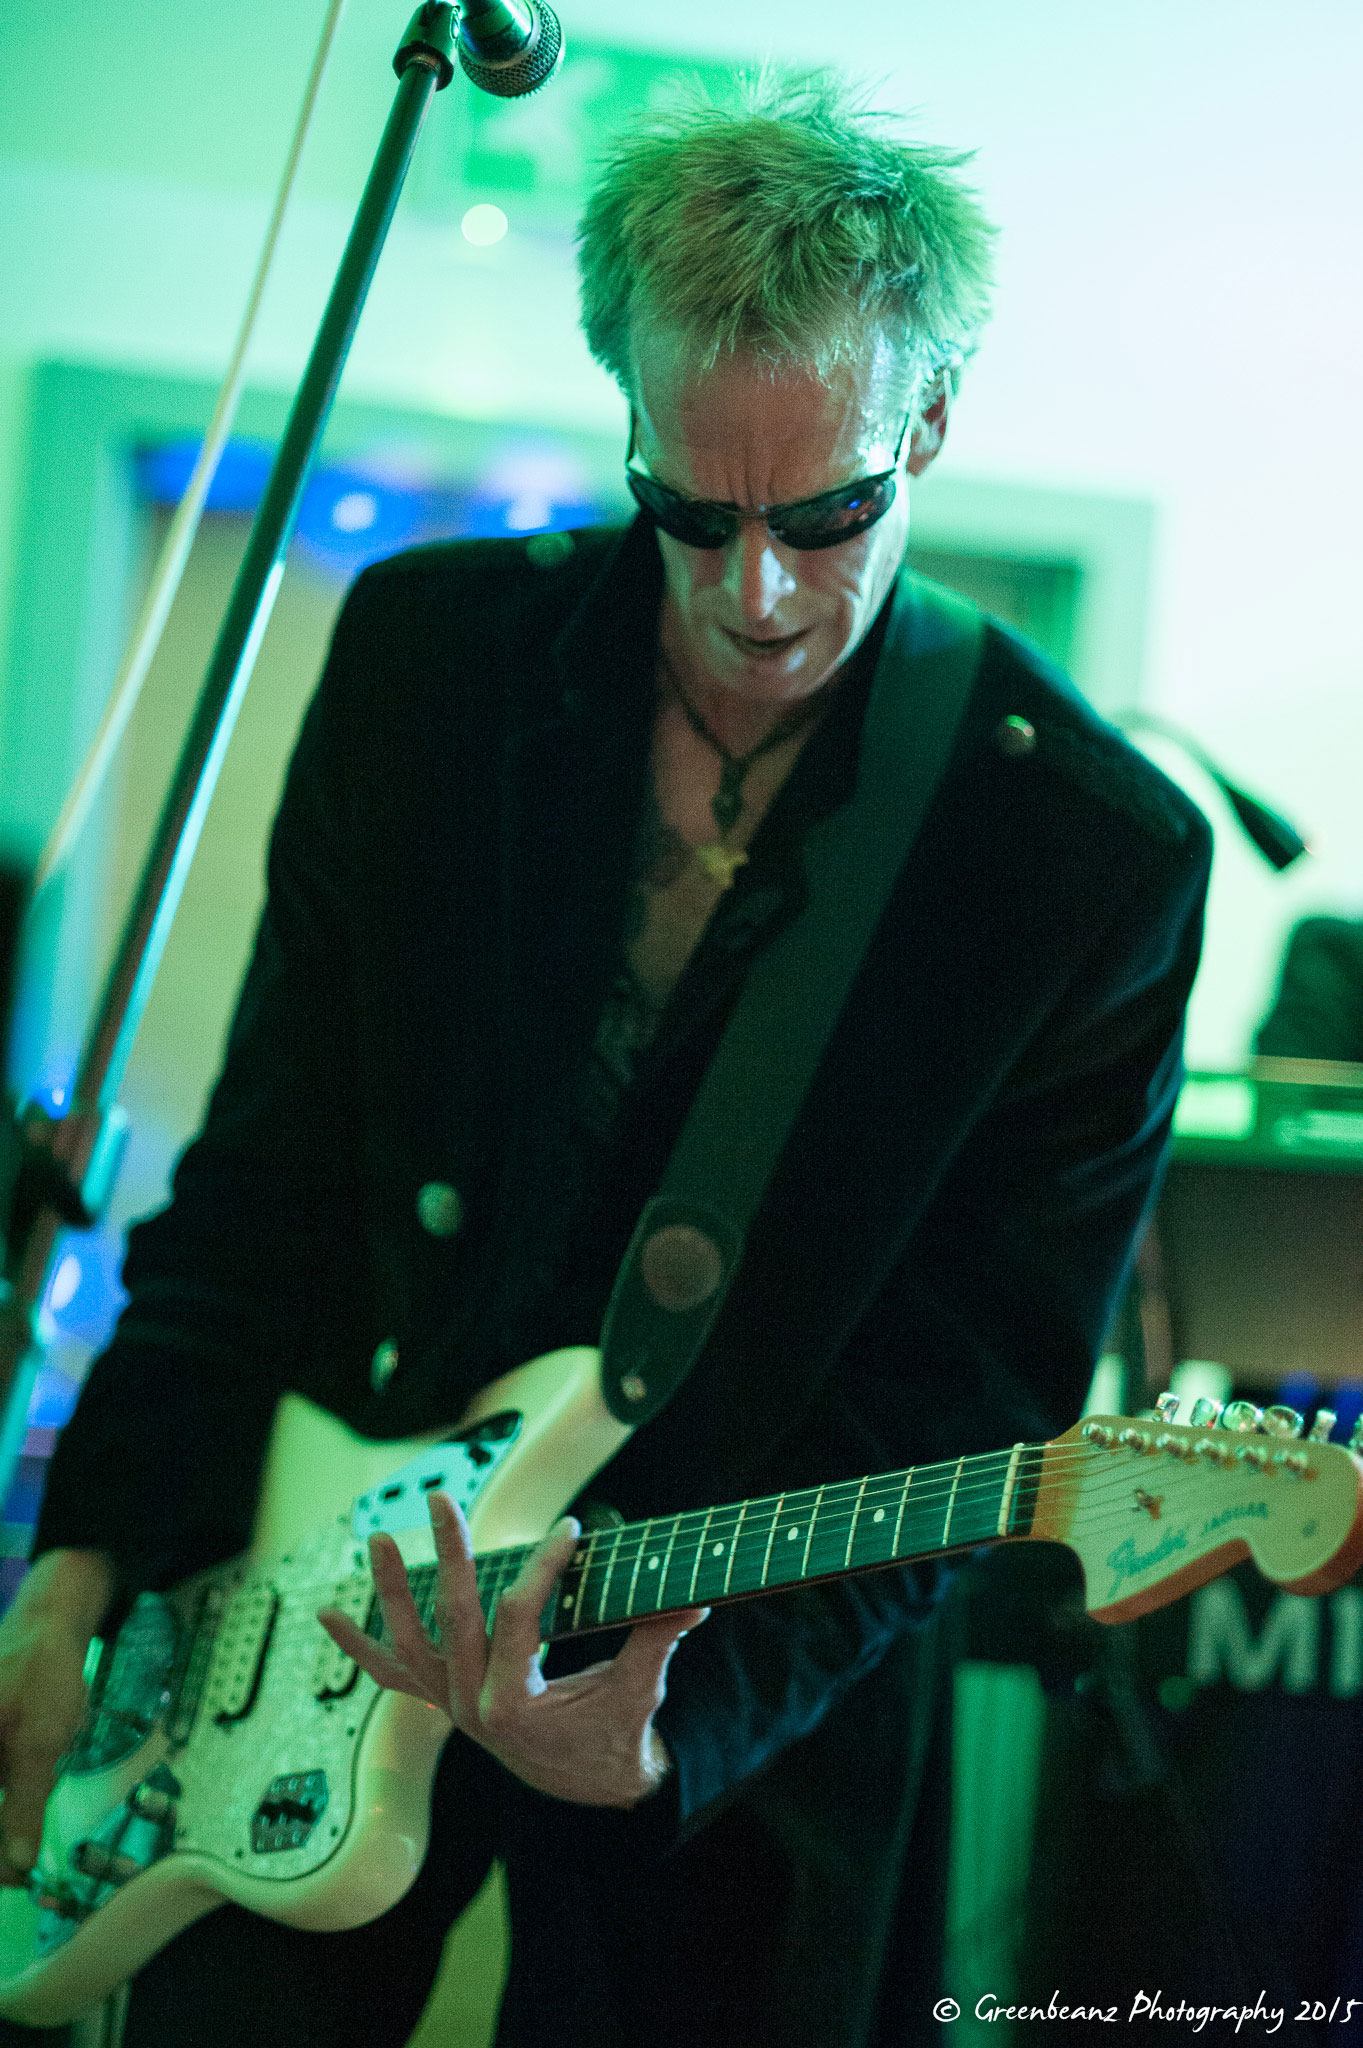 Plymouth Music Photographers Image of Live Gig showing Goth guitarist Ian Cooke at the Looe Music Festival 